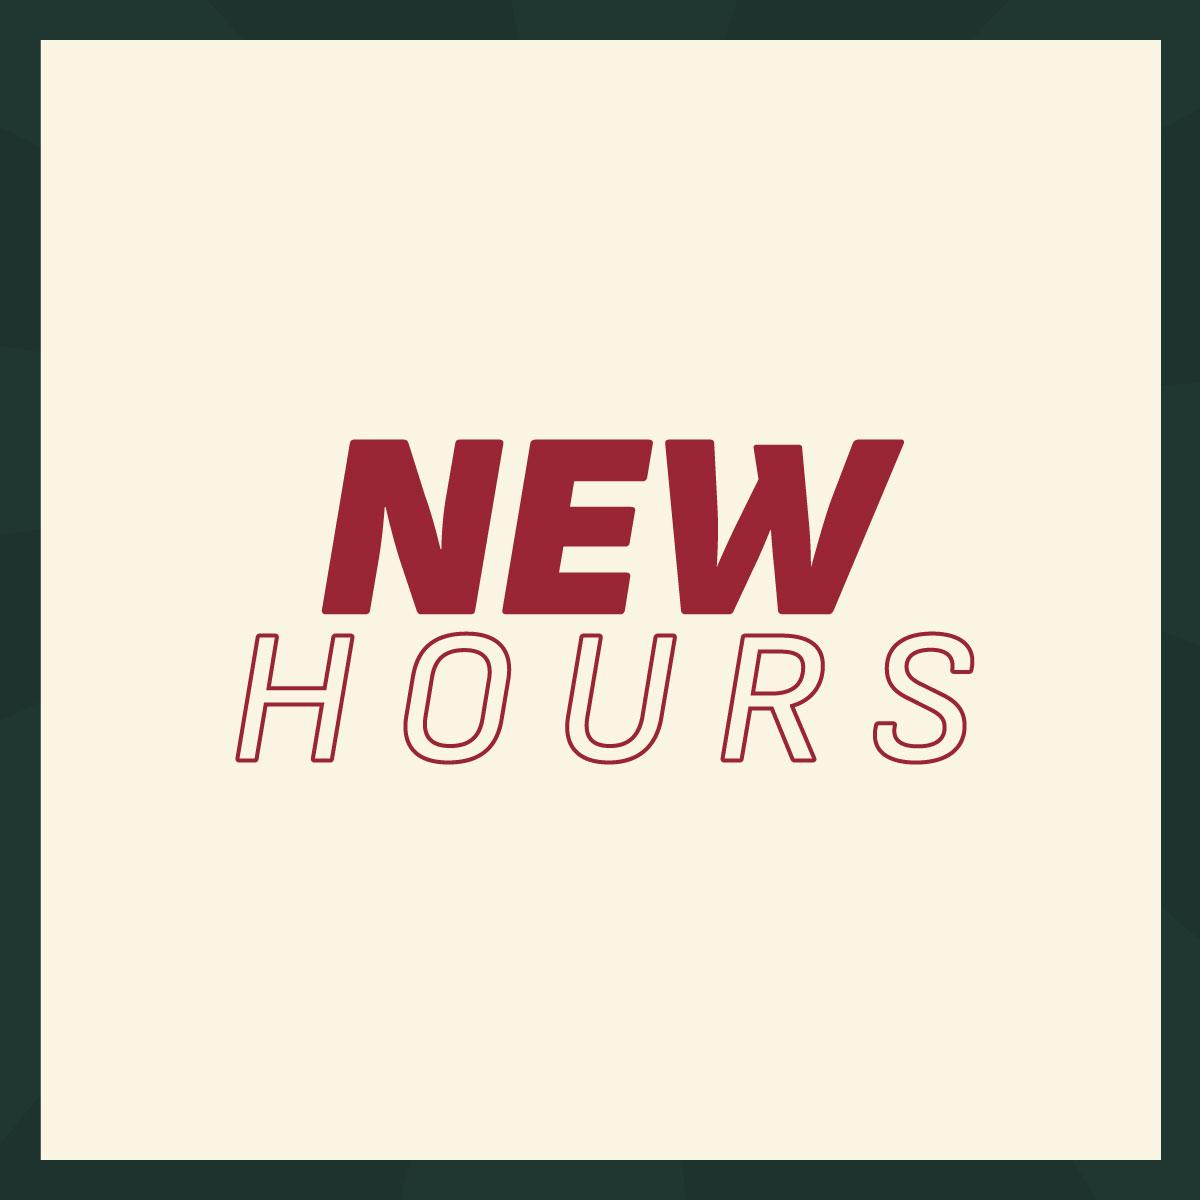 NEW HOURS